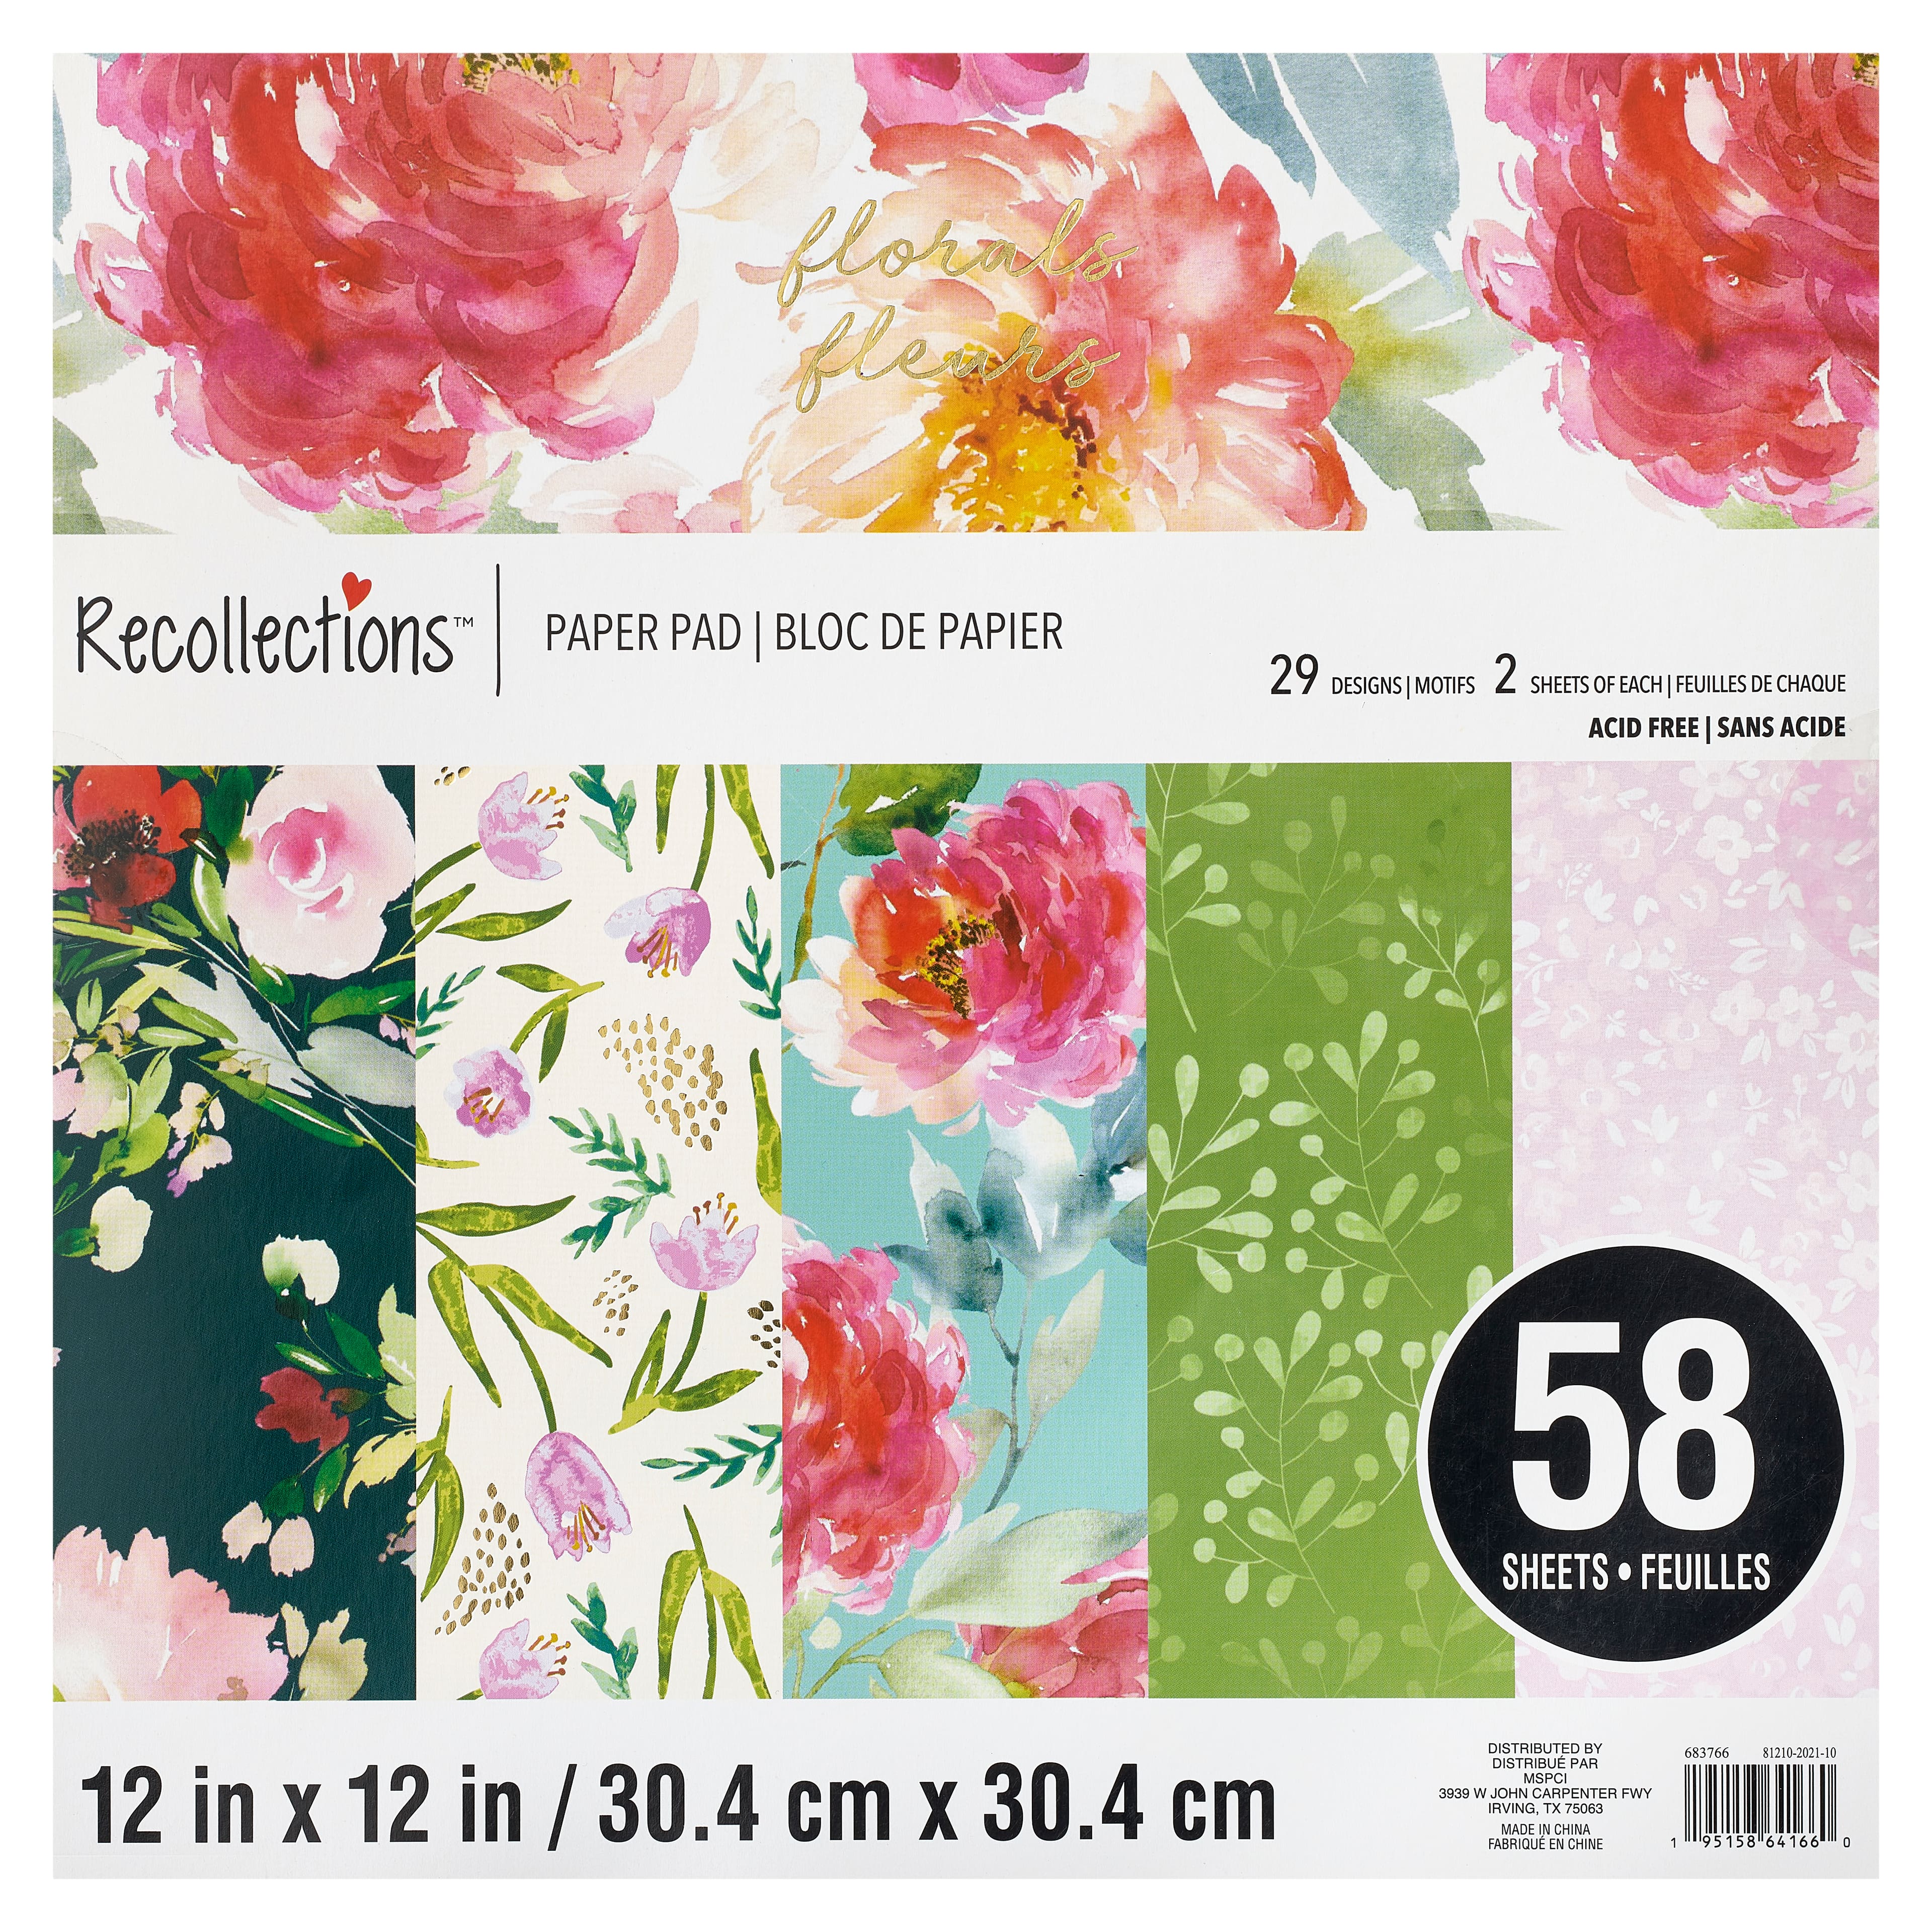 12 Packs: 50 ct. (600 total) Boutique Floral 8.5 x 11 Cardstock Paper by  Recollections™ 